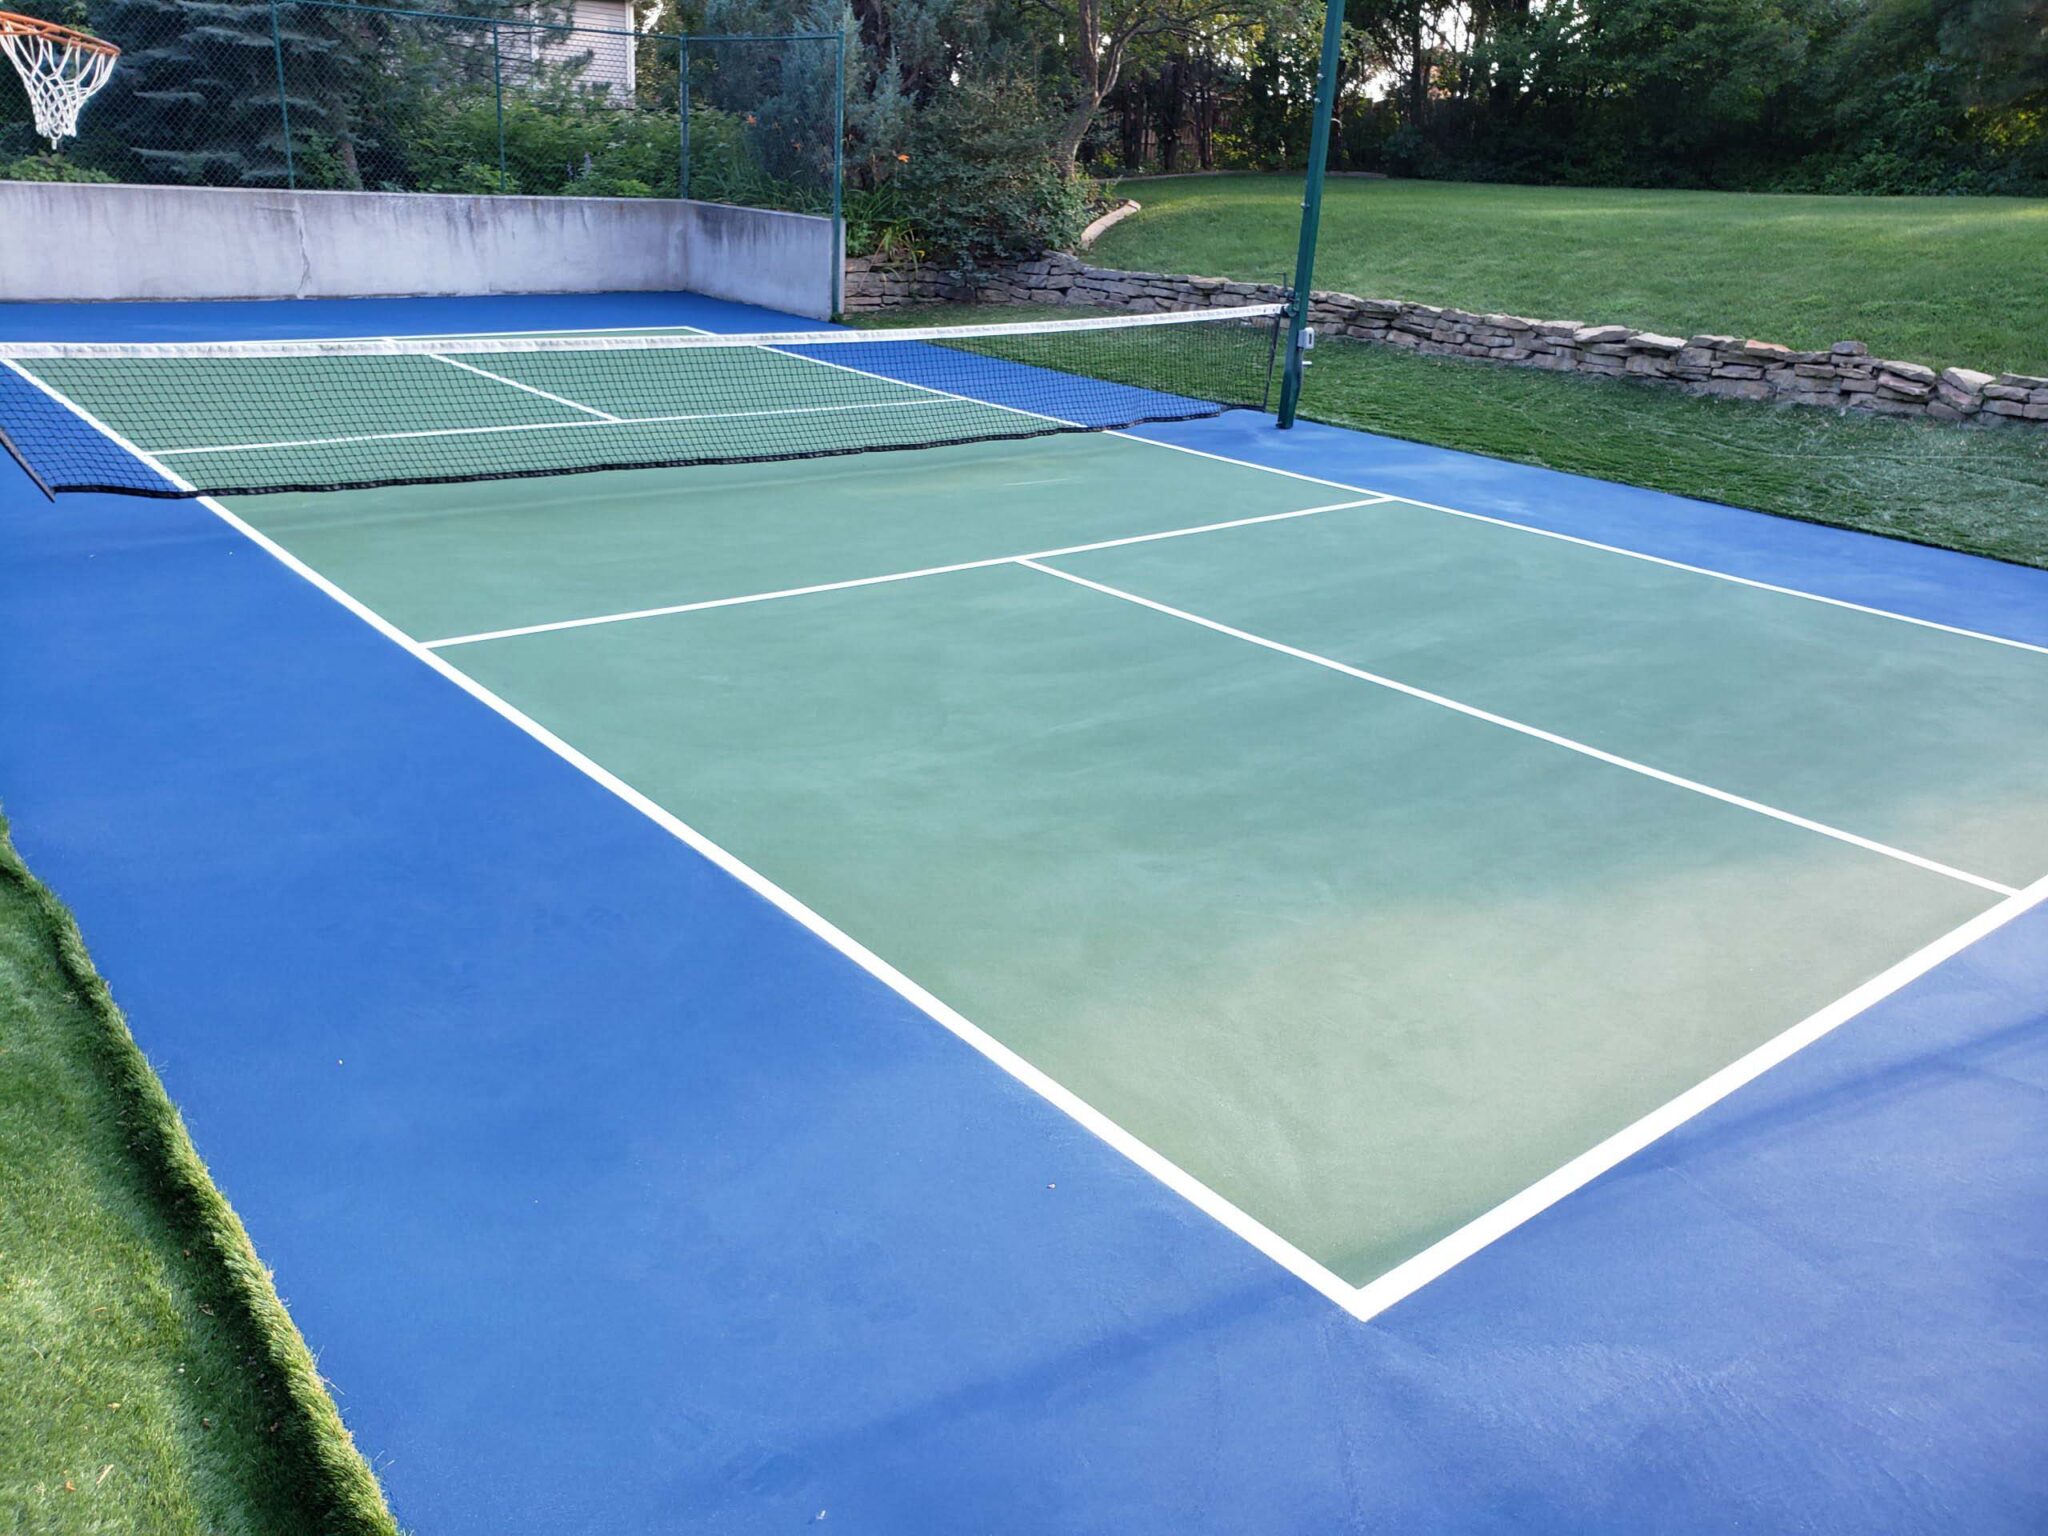 New pickleball court with a green and blue colored surface and white lines.